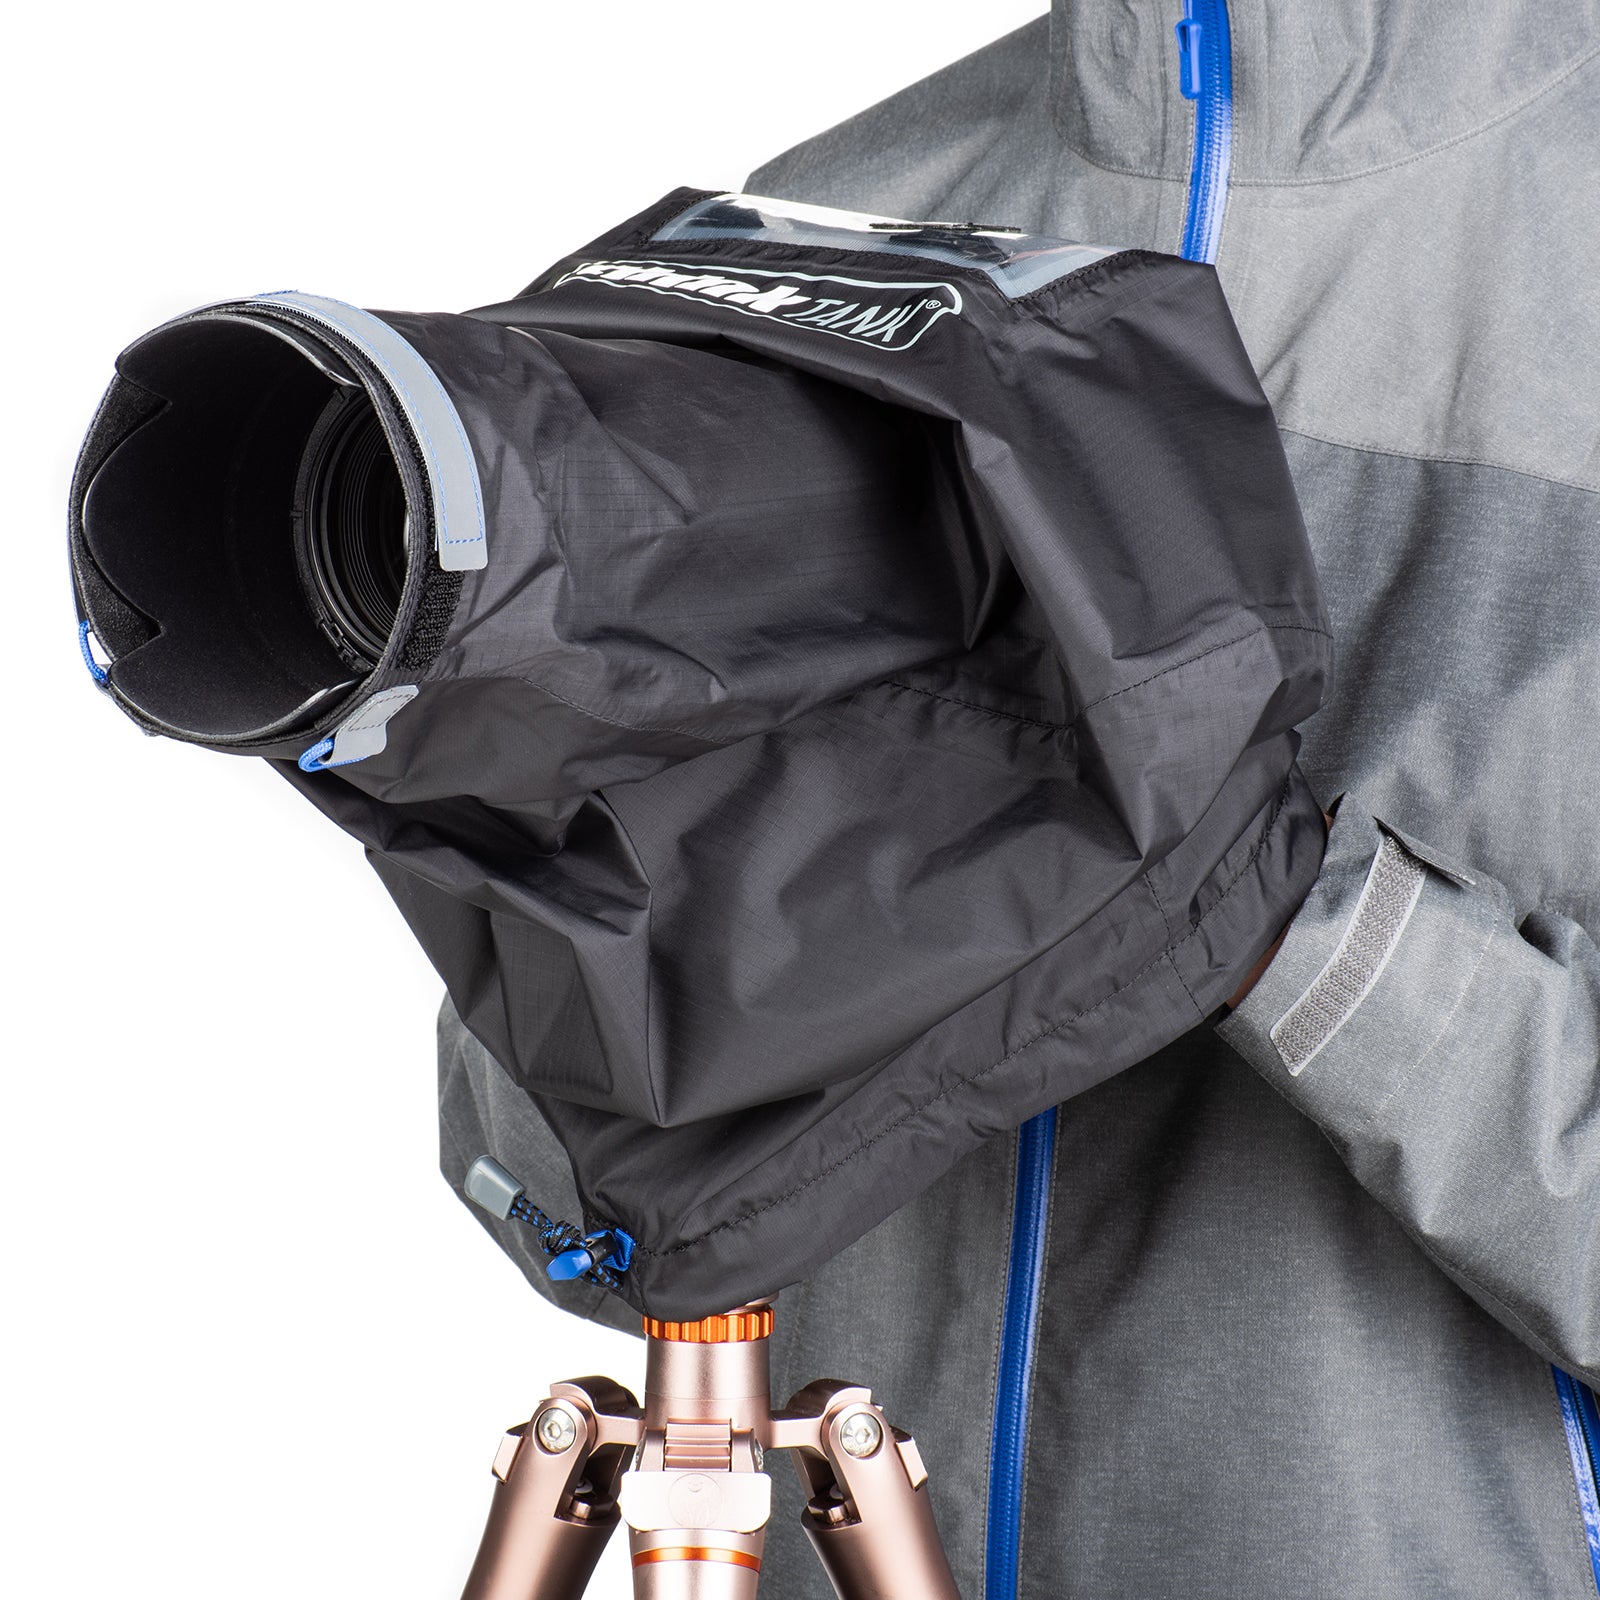 Ability to access your camera through one cinchable sleeve